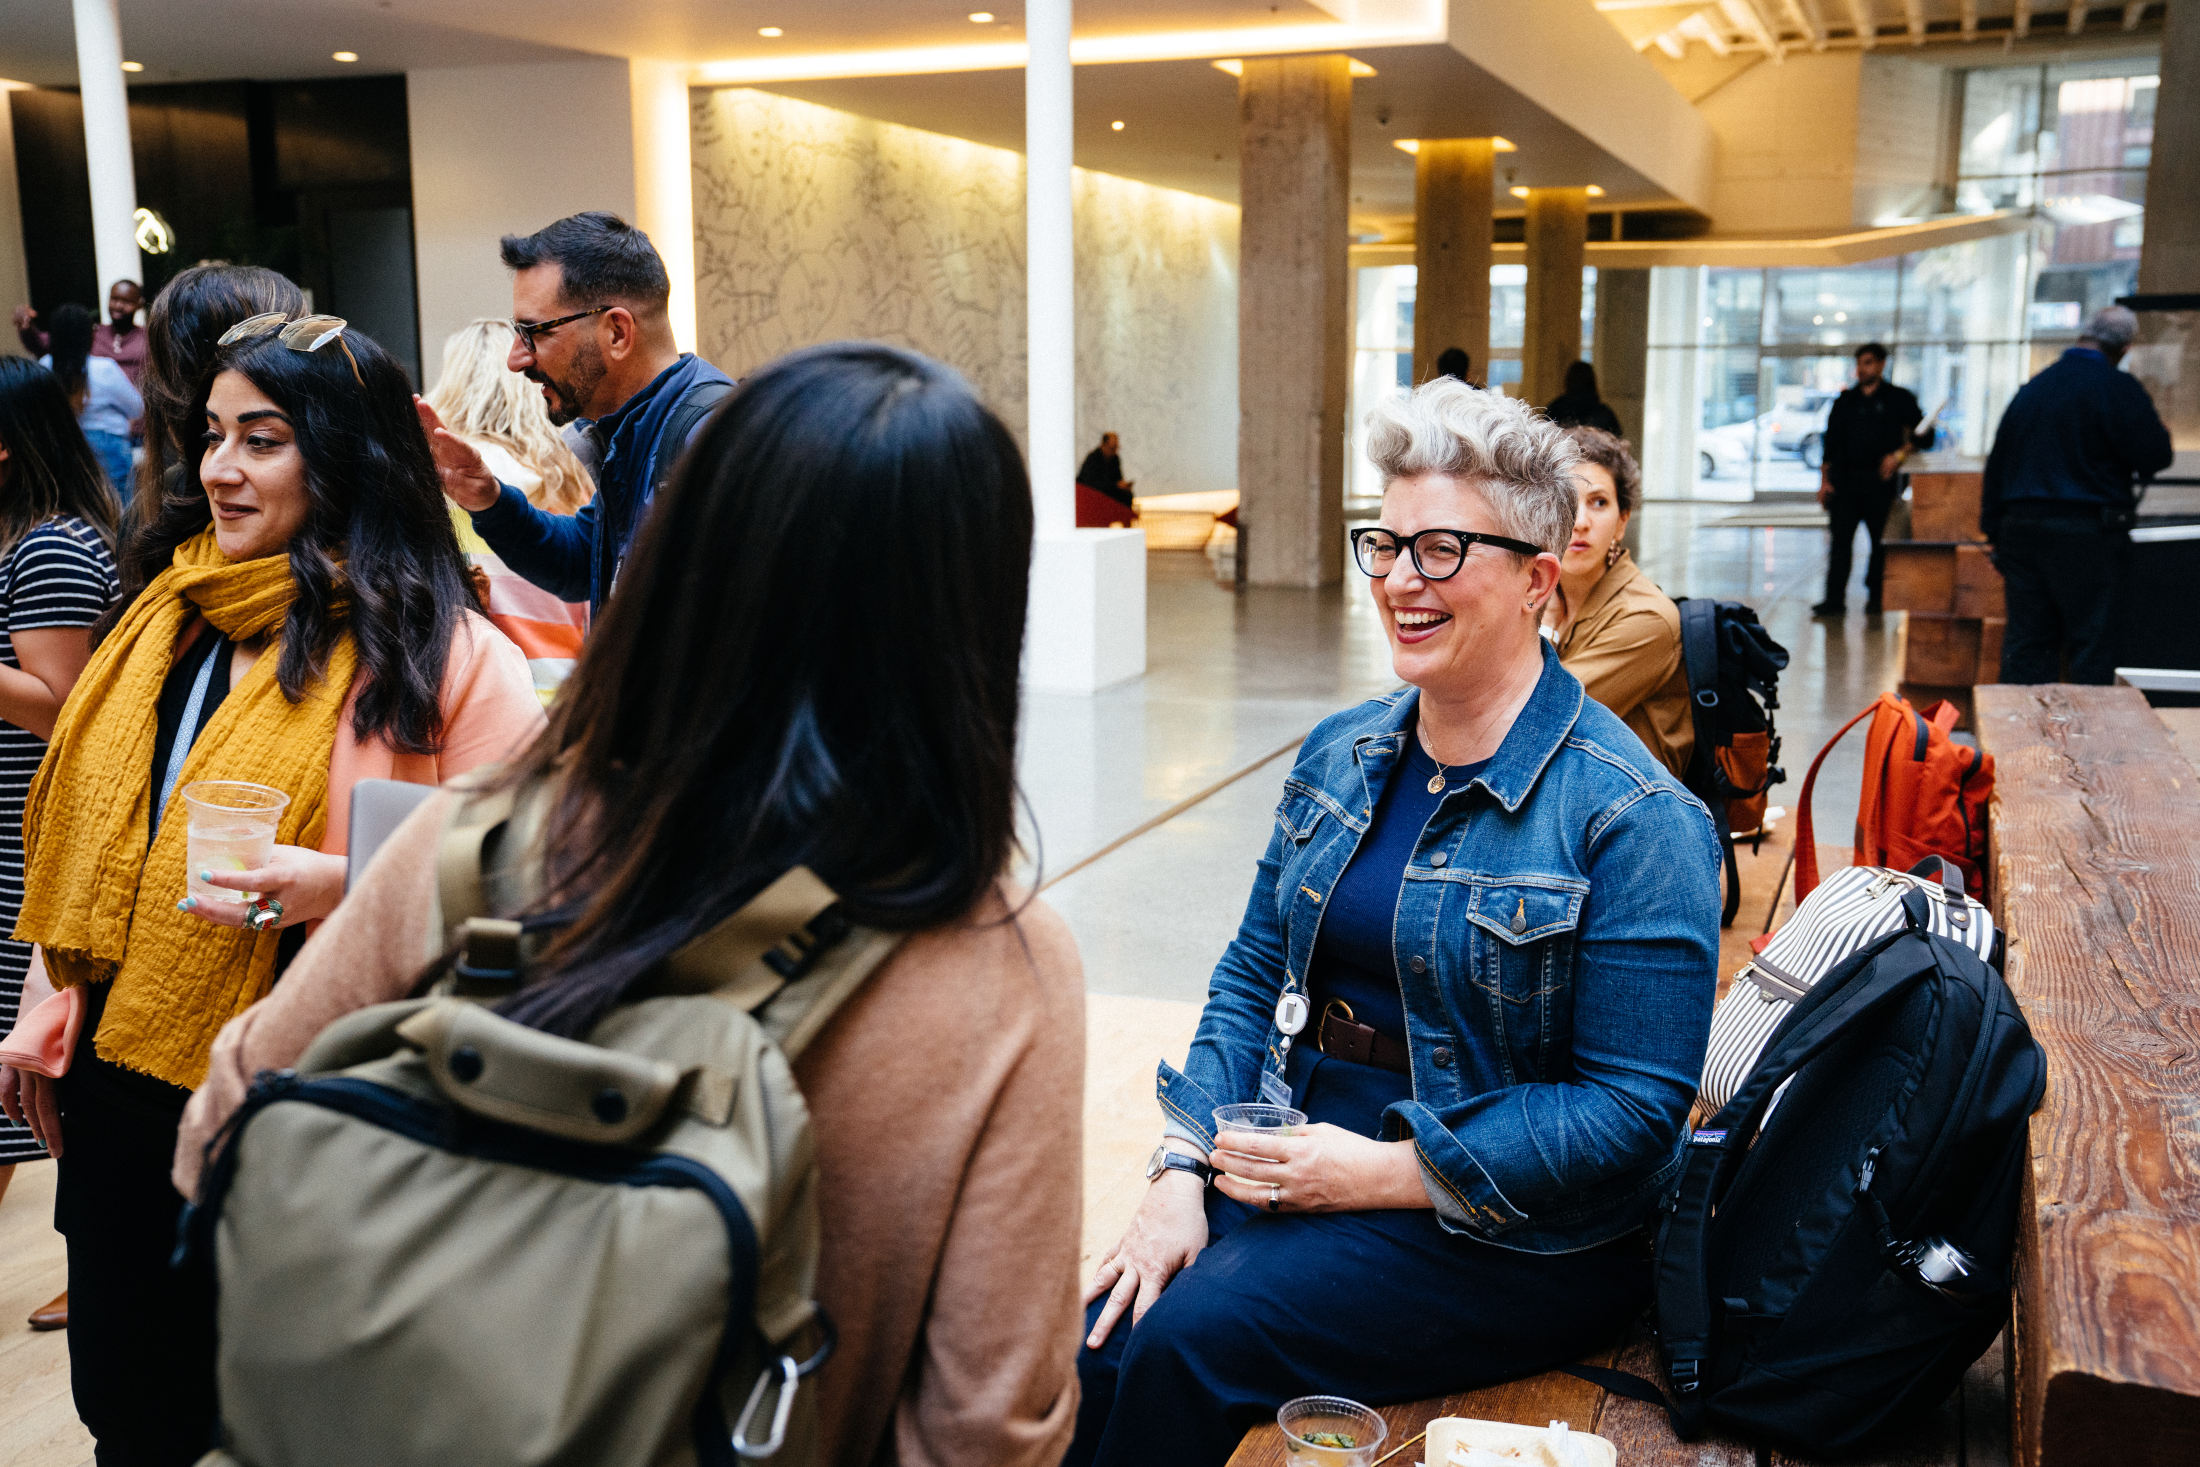 Airbnb team mates share joyful conversations and drinks with each other in the office atrium during a social event